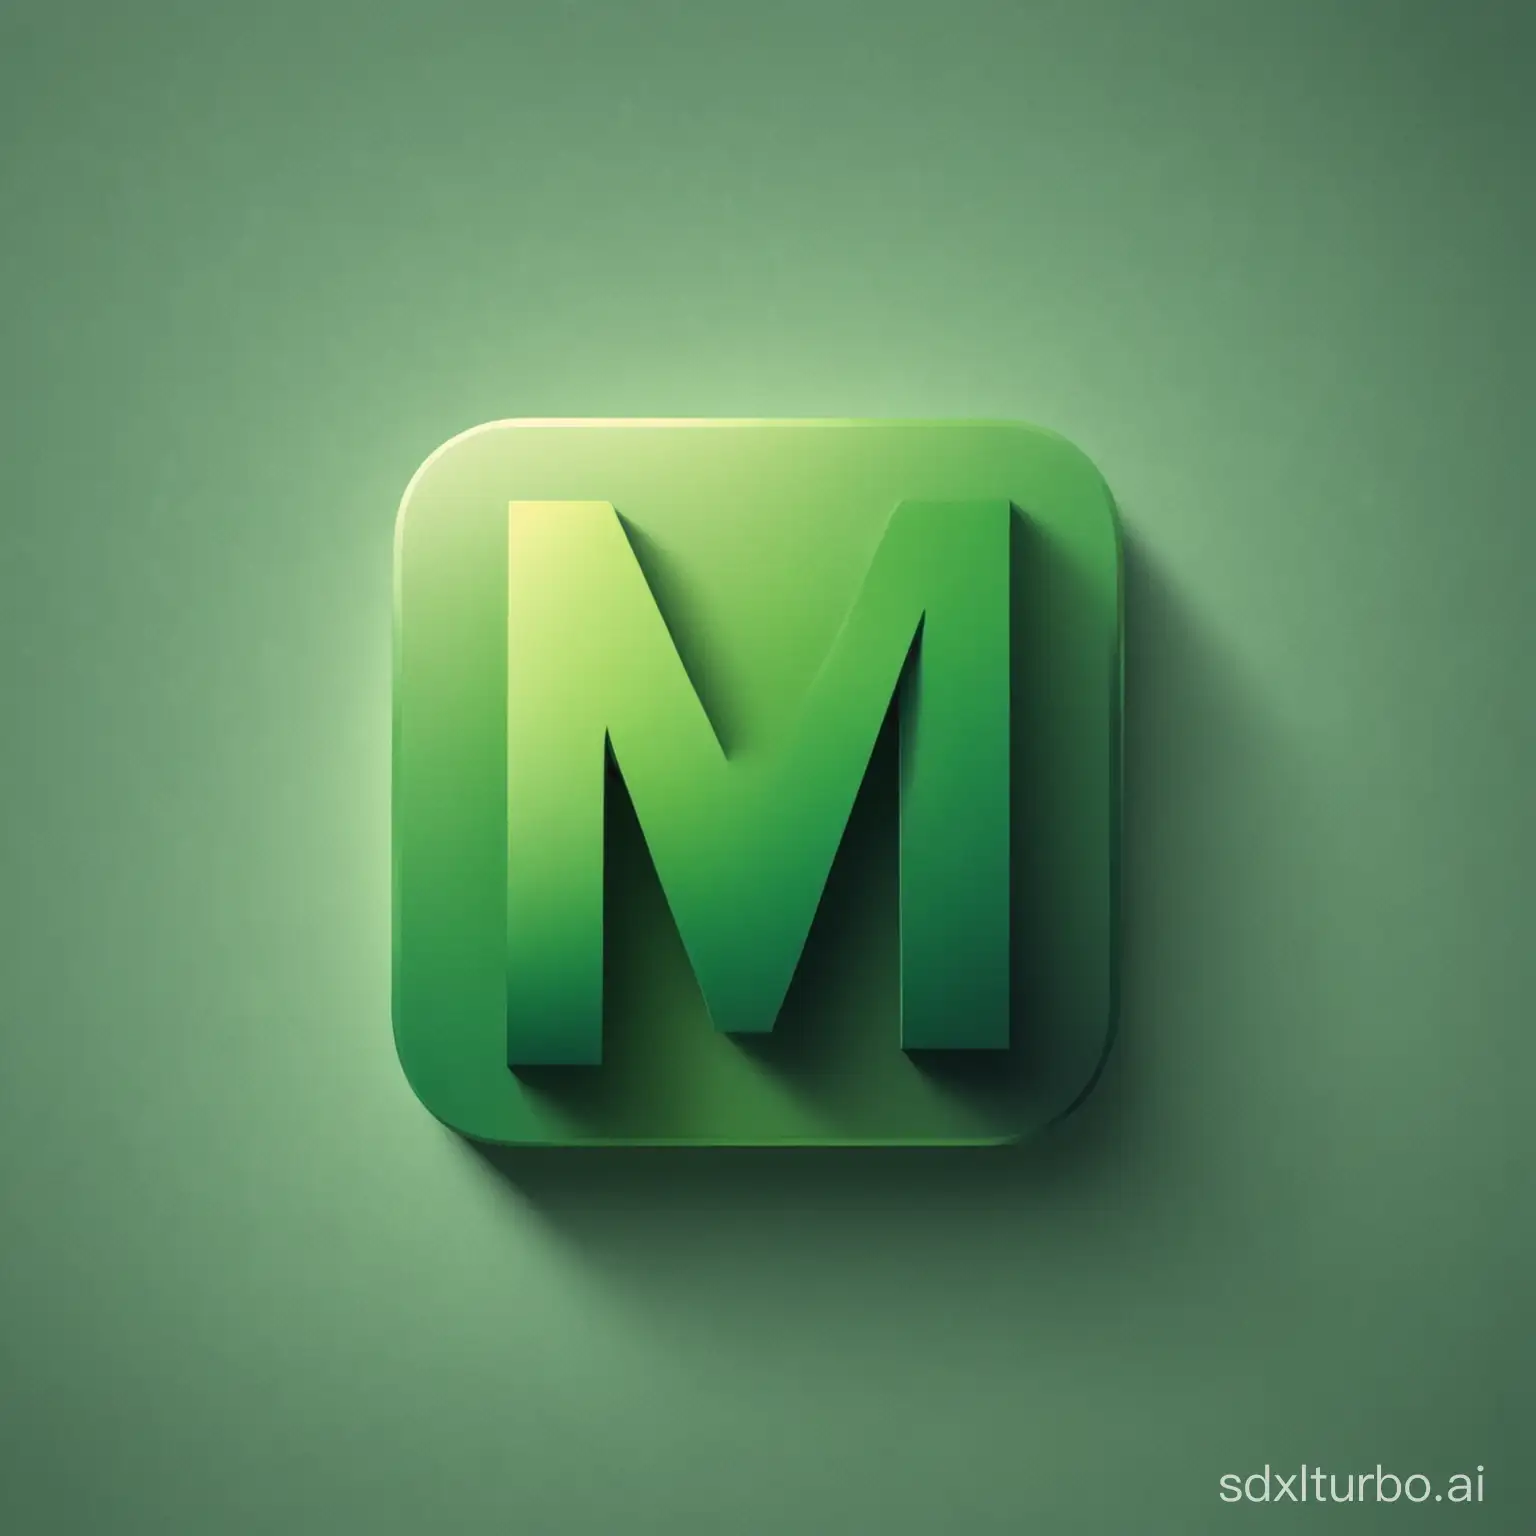 M-letter logo, modern flat, with green shading on the main body and rounded corners